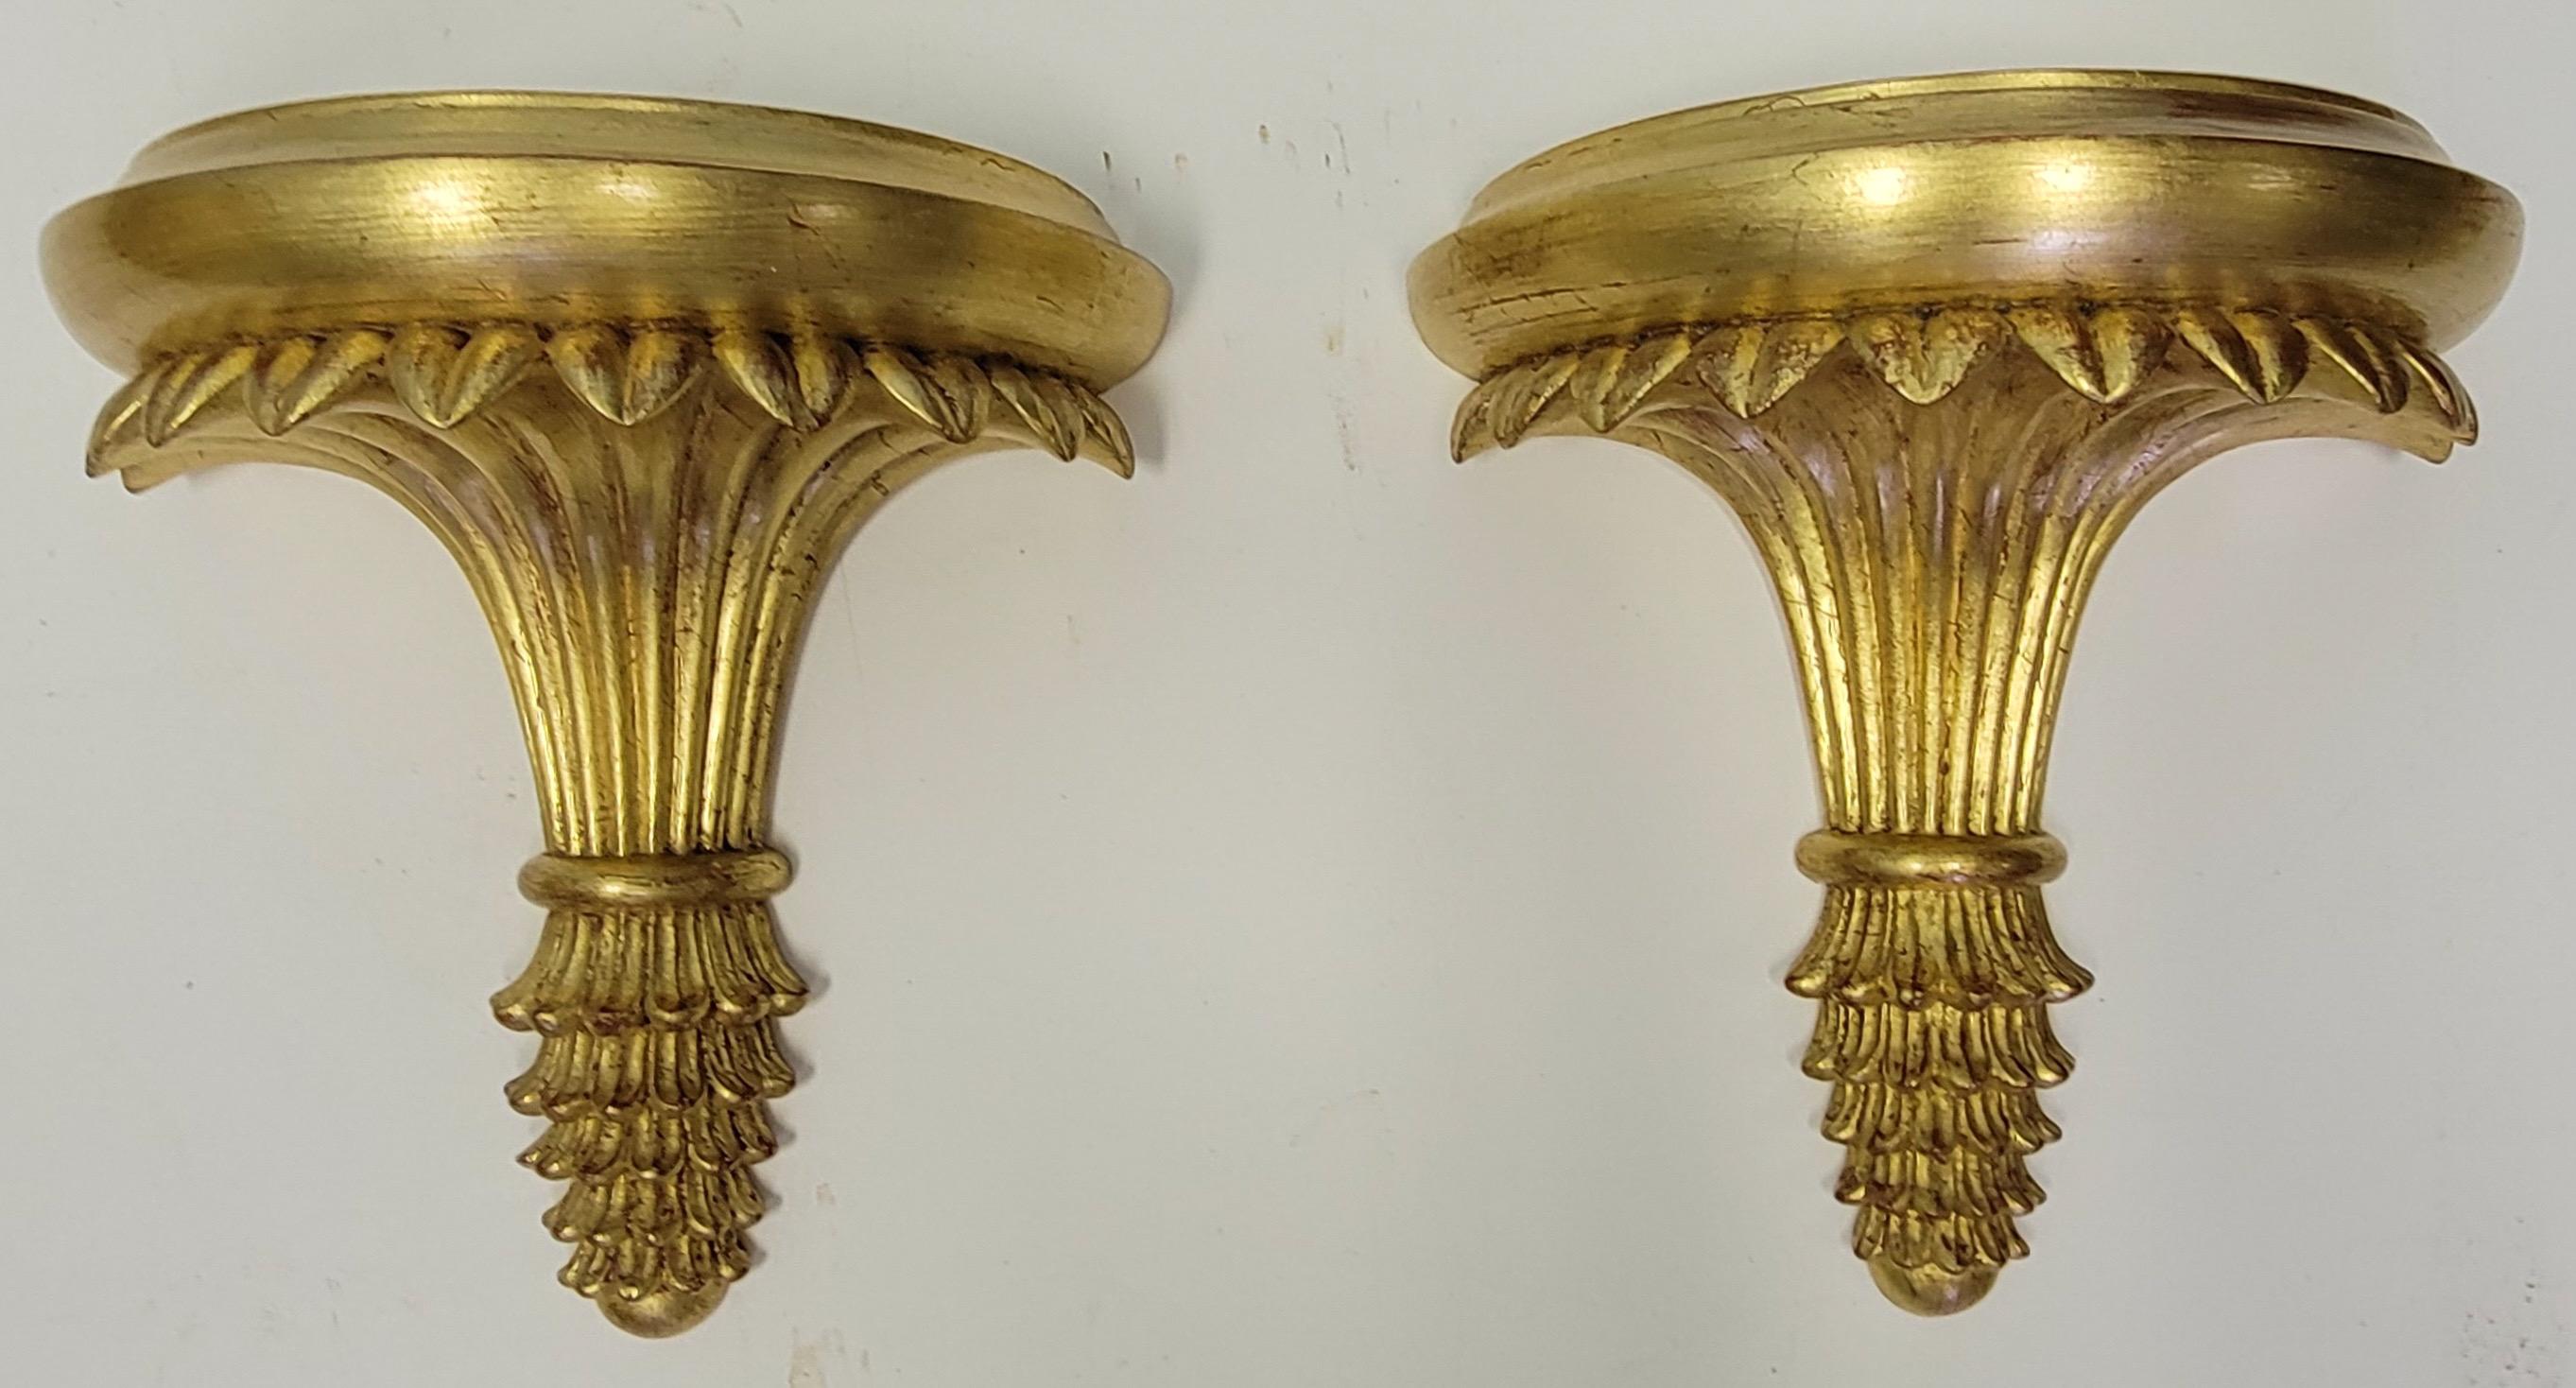 This is a set of four neo-classical style Italian giltwood wall brackets in very good condition. They are unmarked and in very good condition.